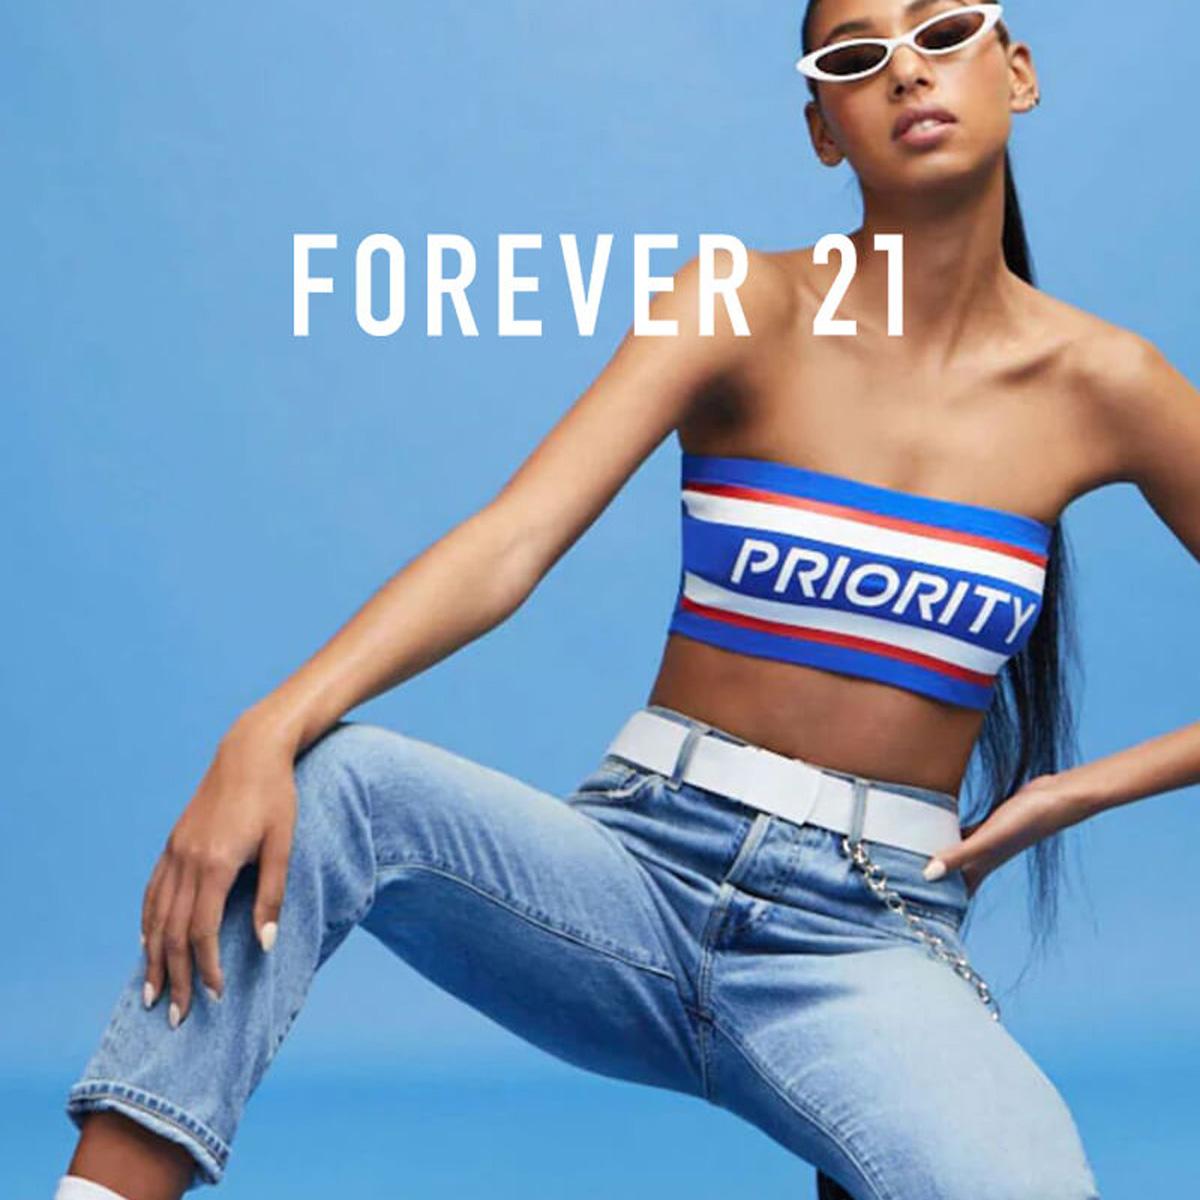 forever-21-women-s-size-chart-for-clothes-accessories-and-shoes